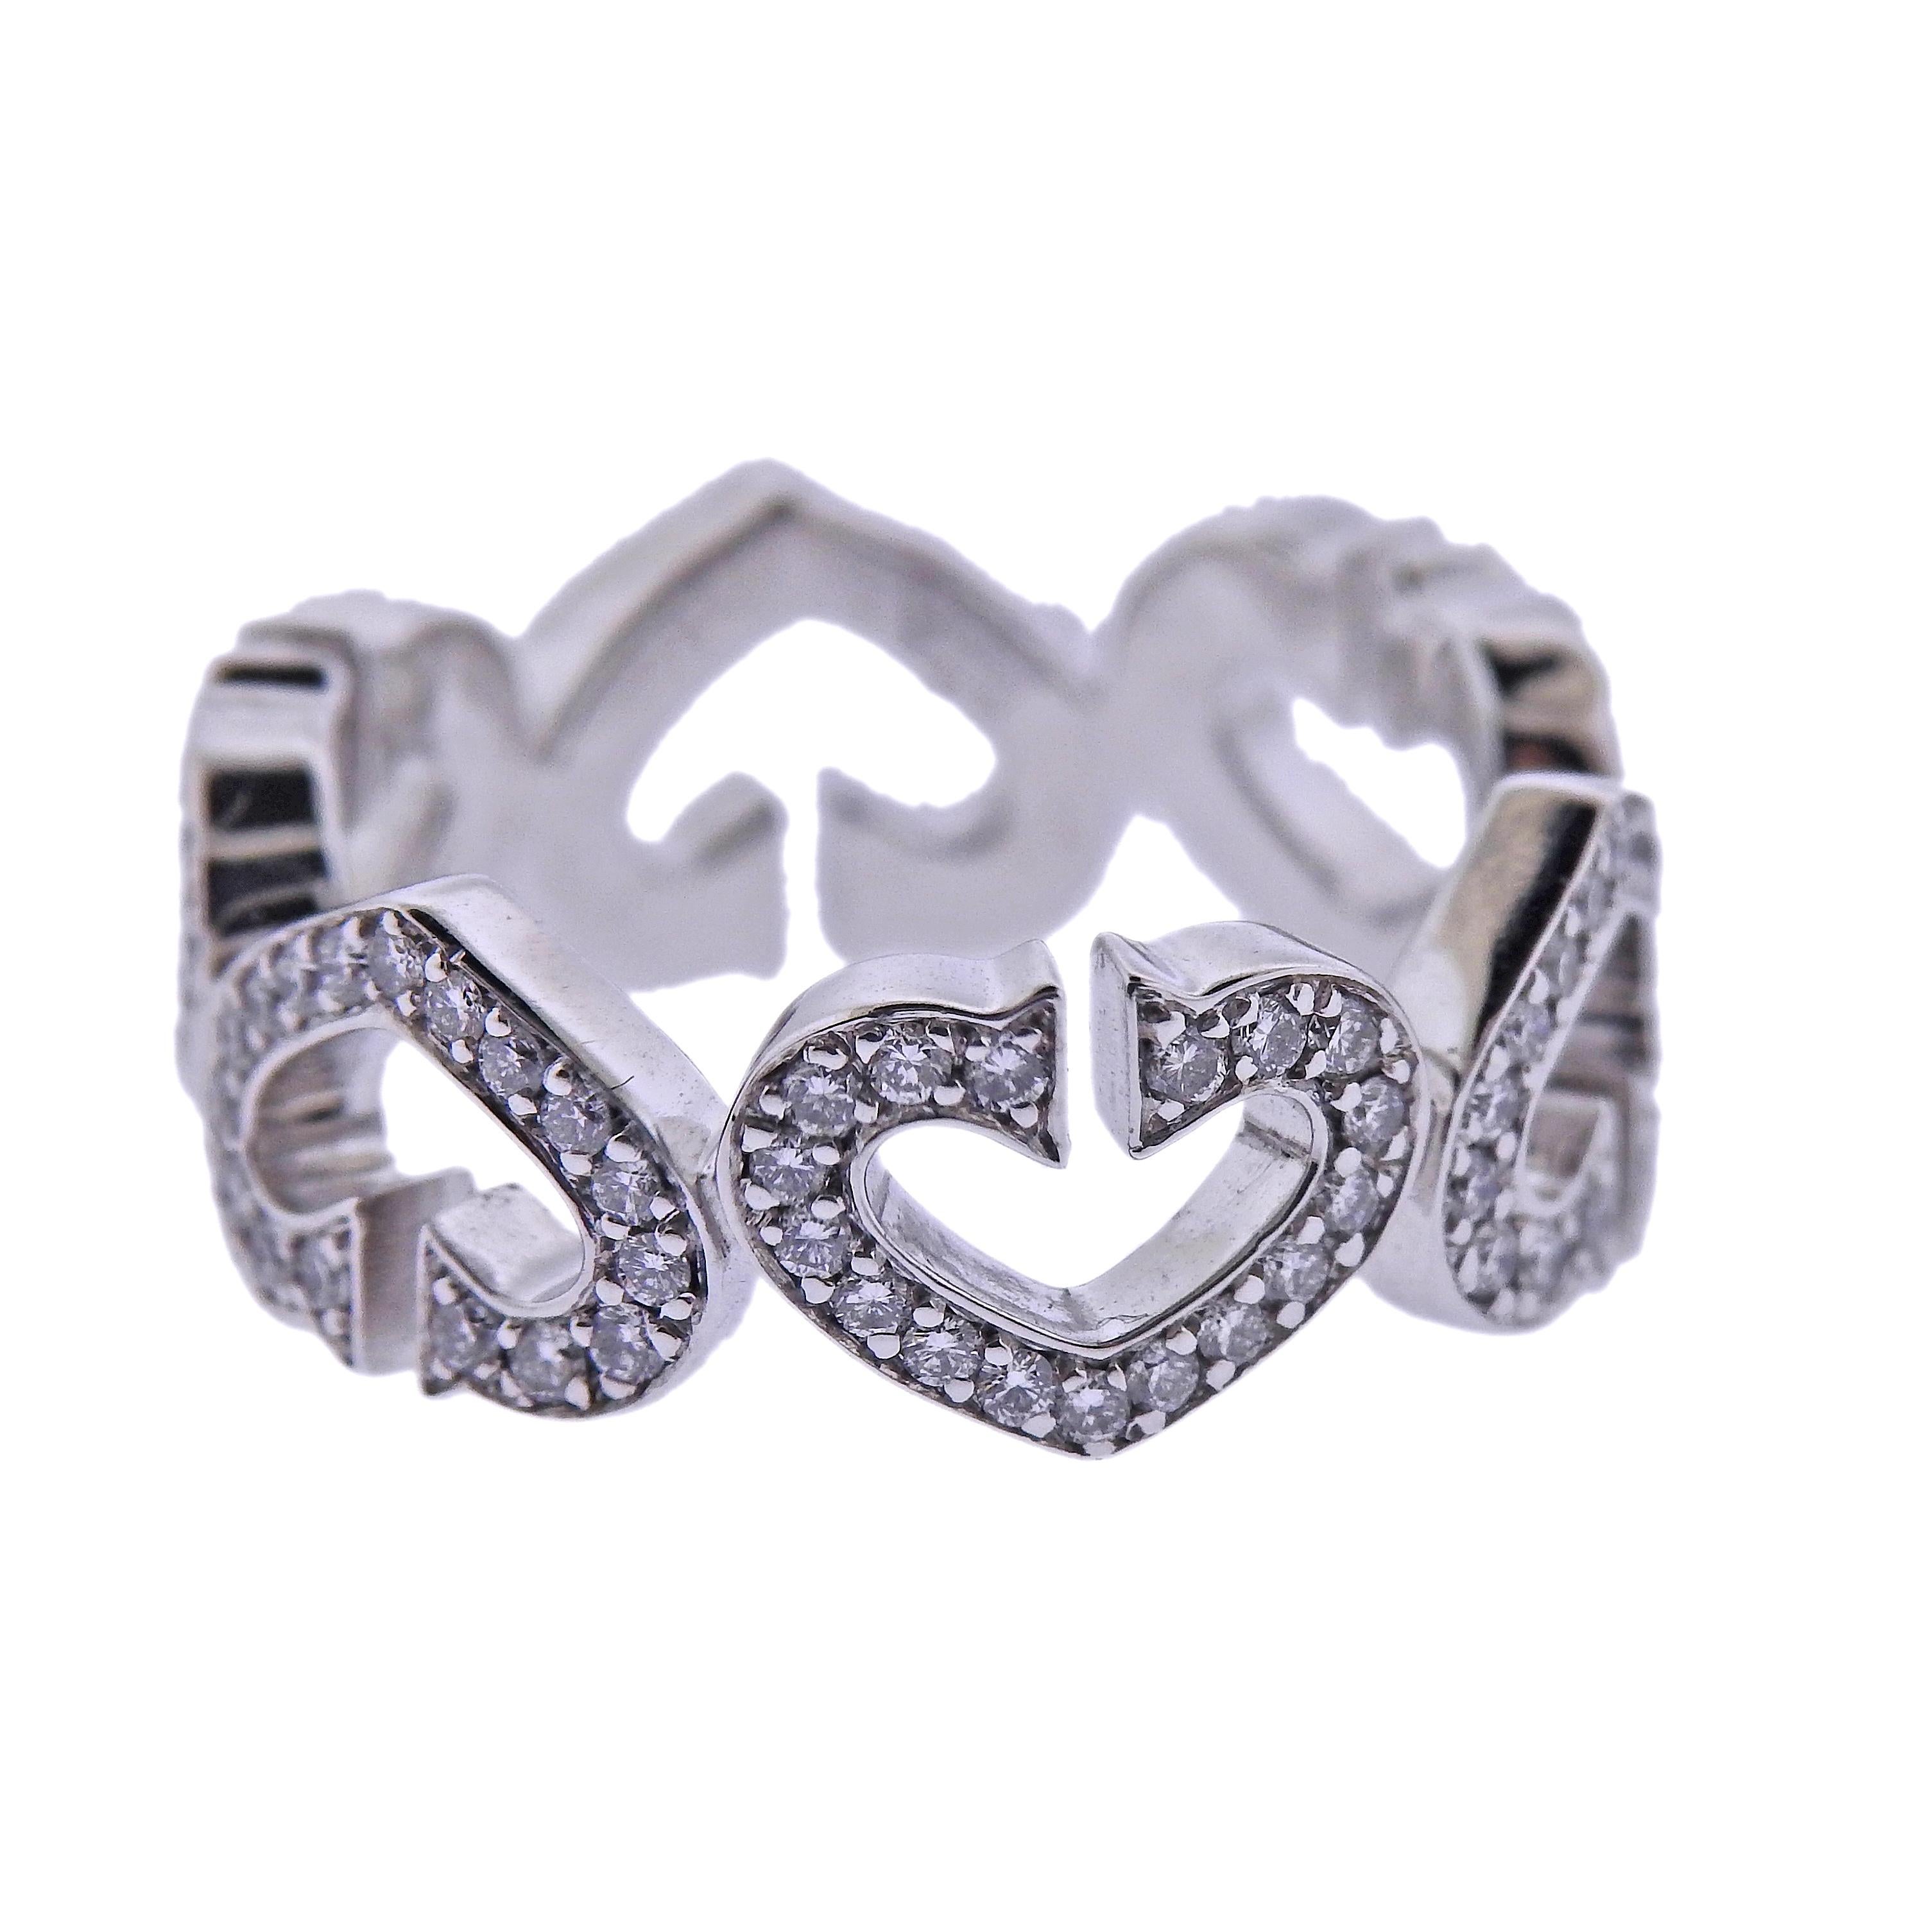 18k white gold heart band ring by Cartier, with approx. 0.60ctw in diamonds. Comes in Cartier box. Size 5, width 7mm. Marked: AR3891, 49, 750, Cartier. Weight - 6 grams. 